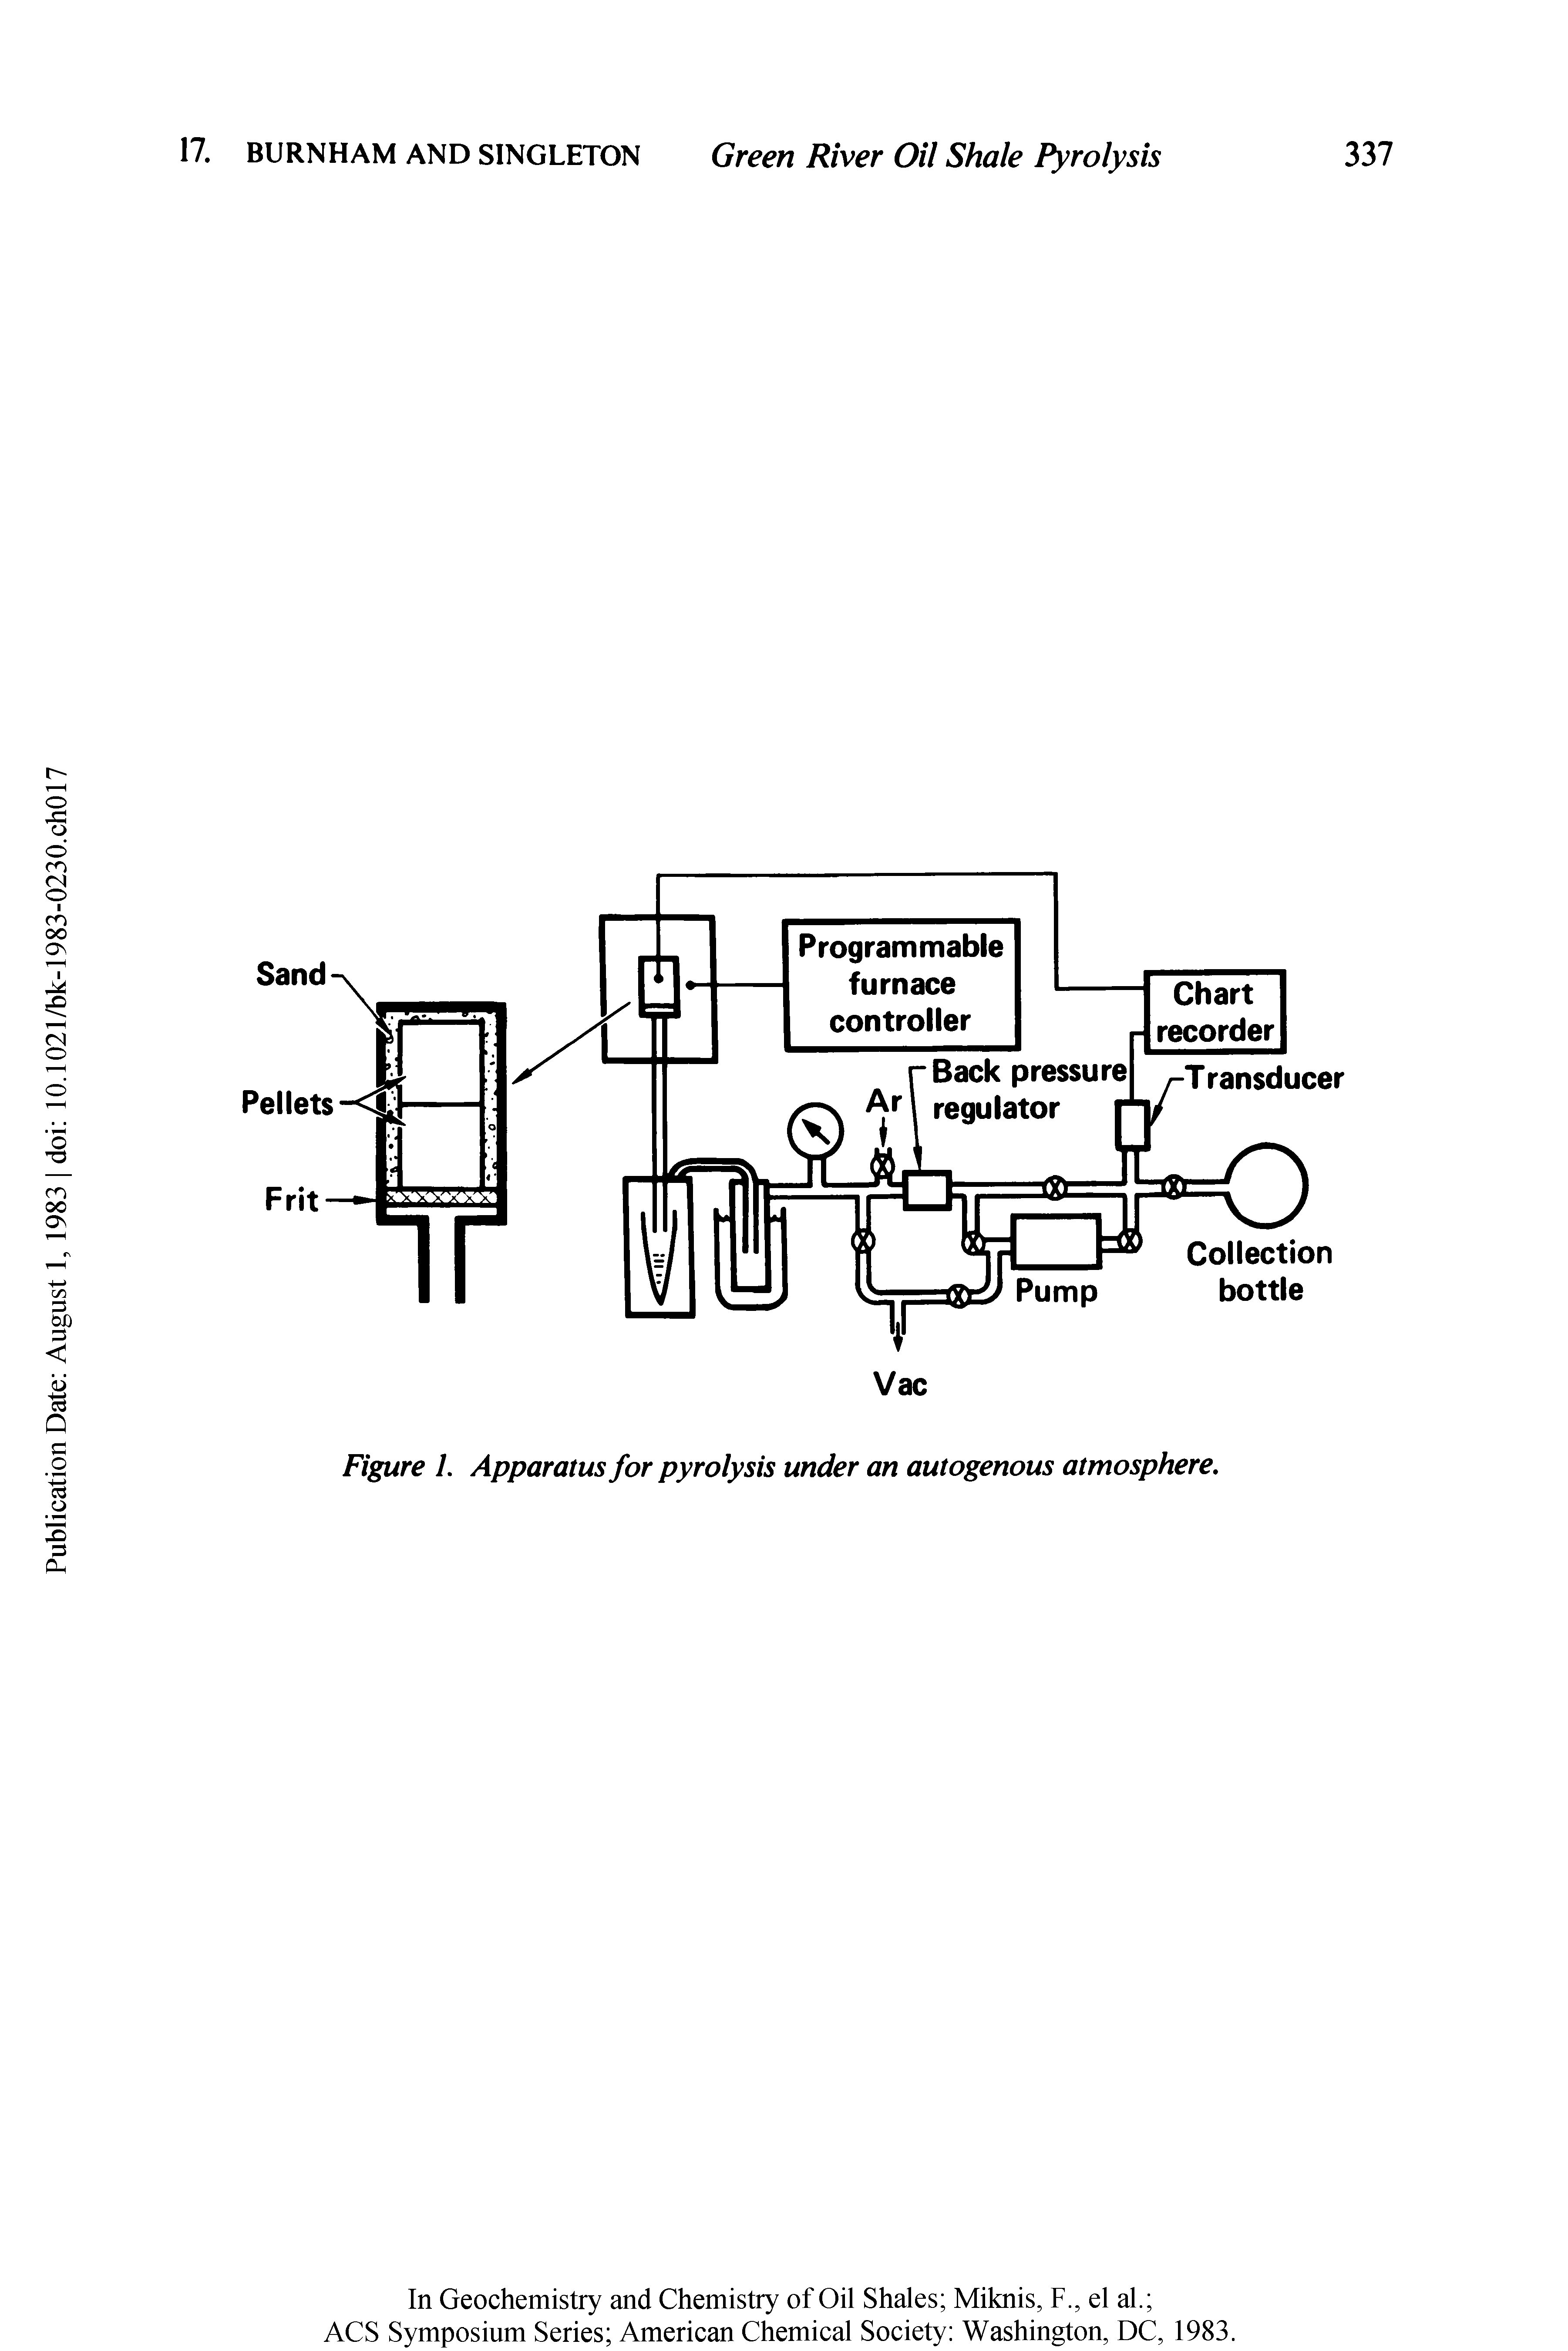 Figure 1. Apparatus for pyrolysis under an autogenous atmosphere.